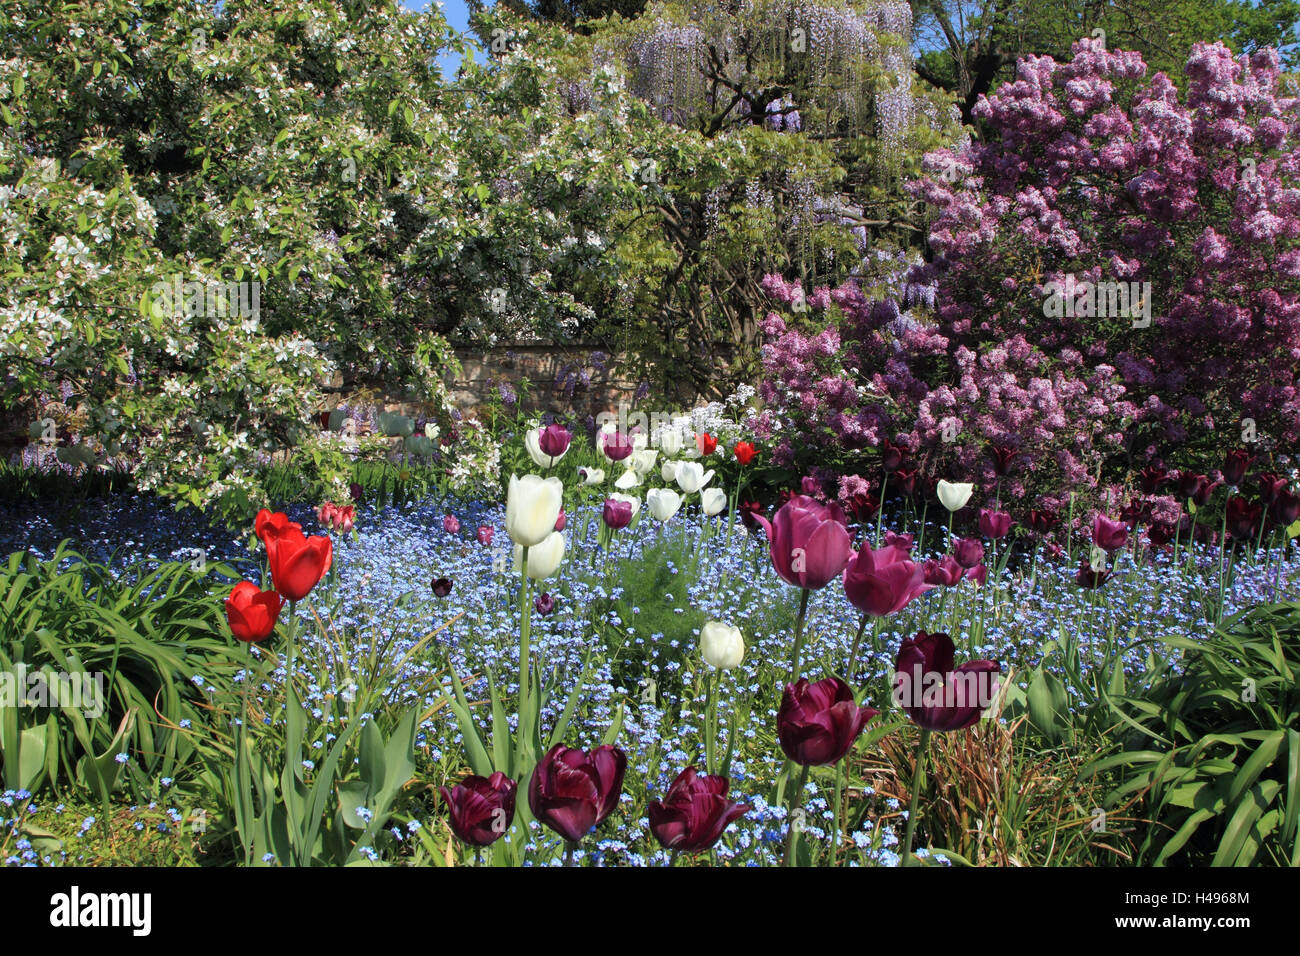 Lilacs, tulips, forget-me-not, blossom, garden, spring, season, trees, flowers, plants, landscape format, blossoms, Stock Photo